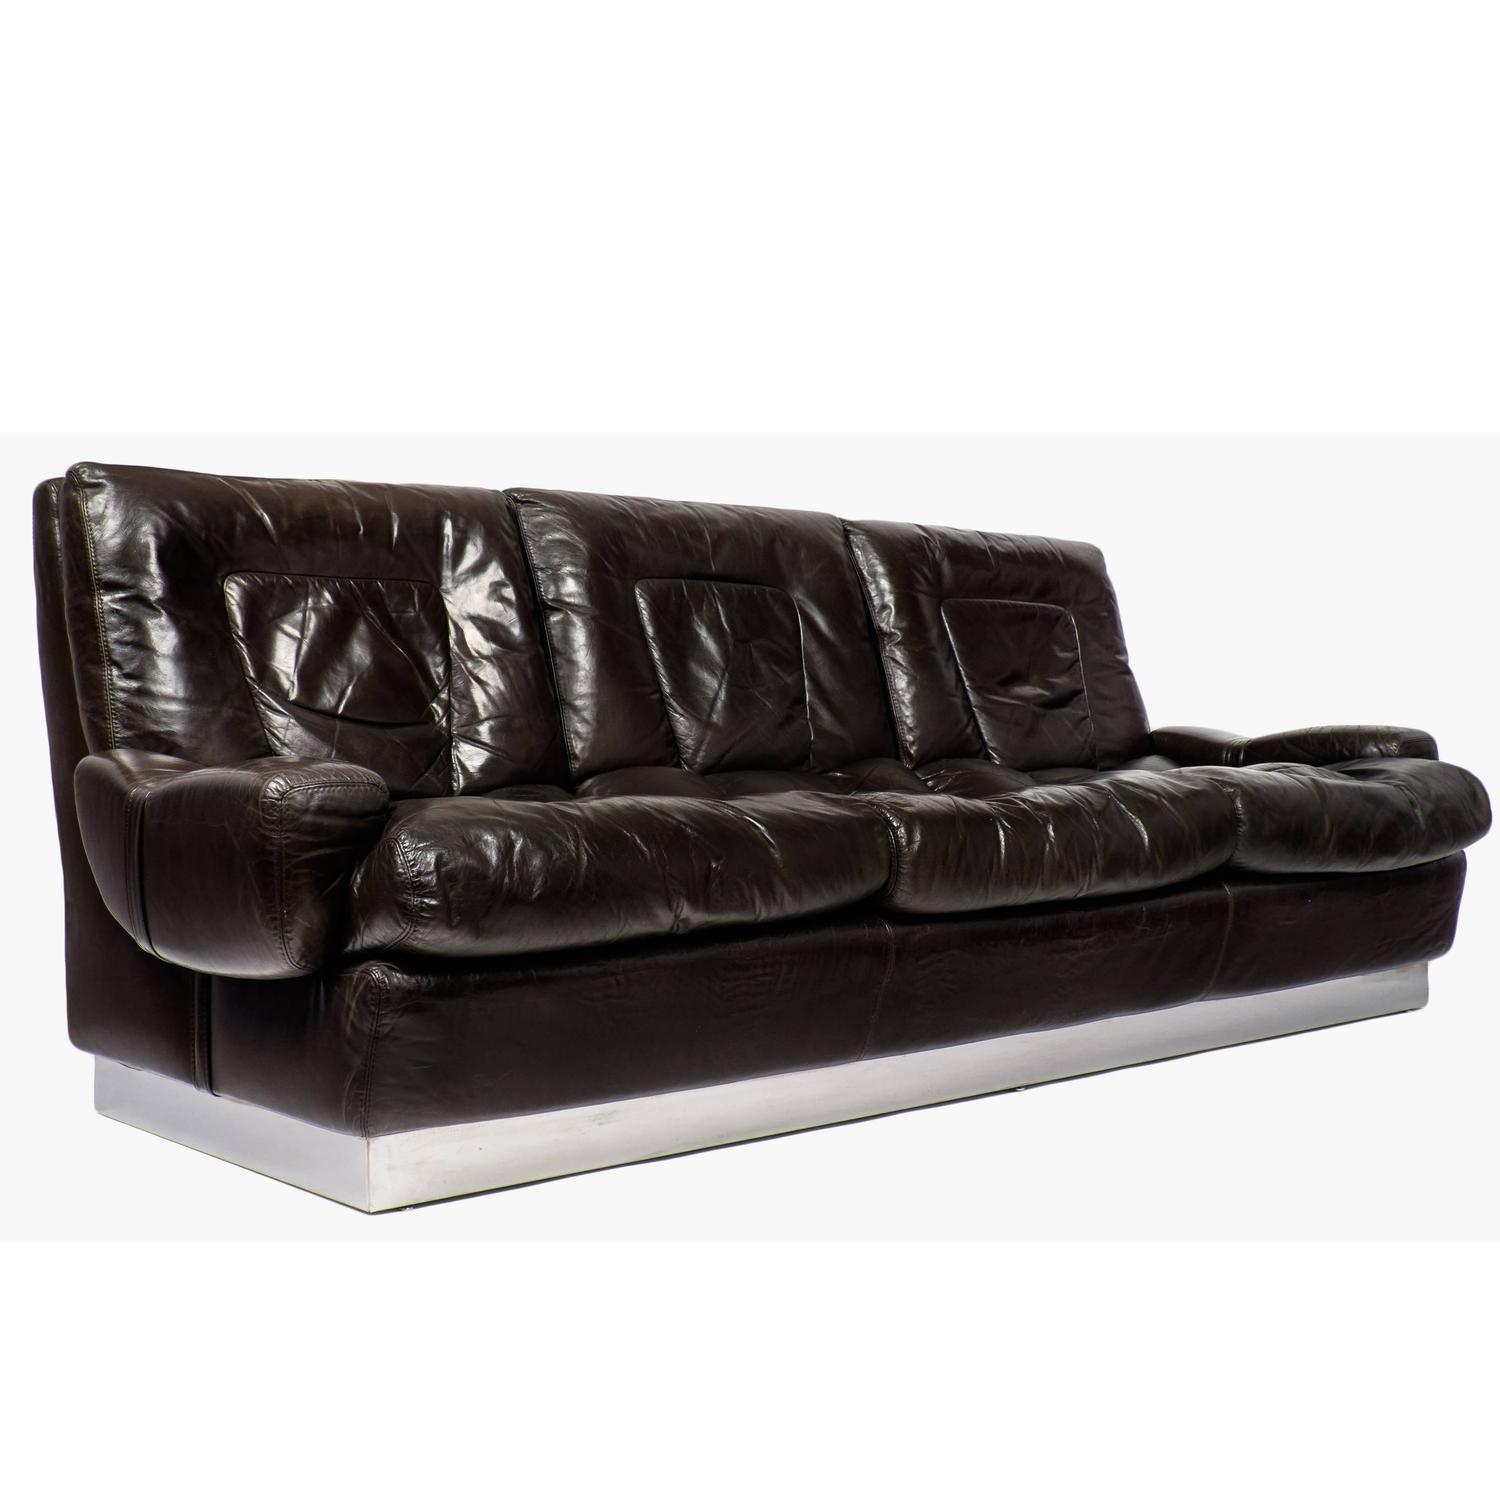 Vintage French Leather Sofa by Jacques Charpentier at 1stdibs